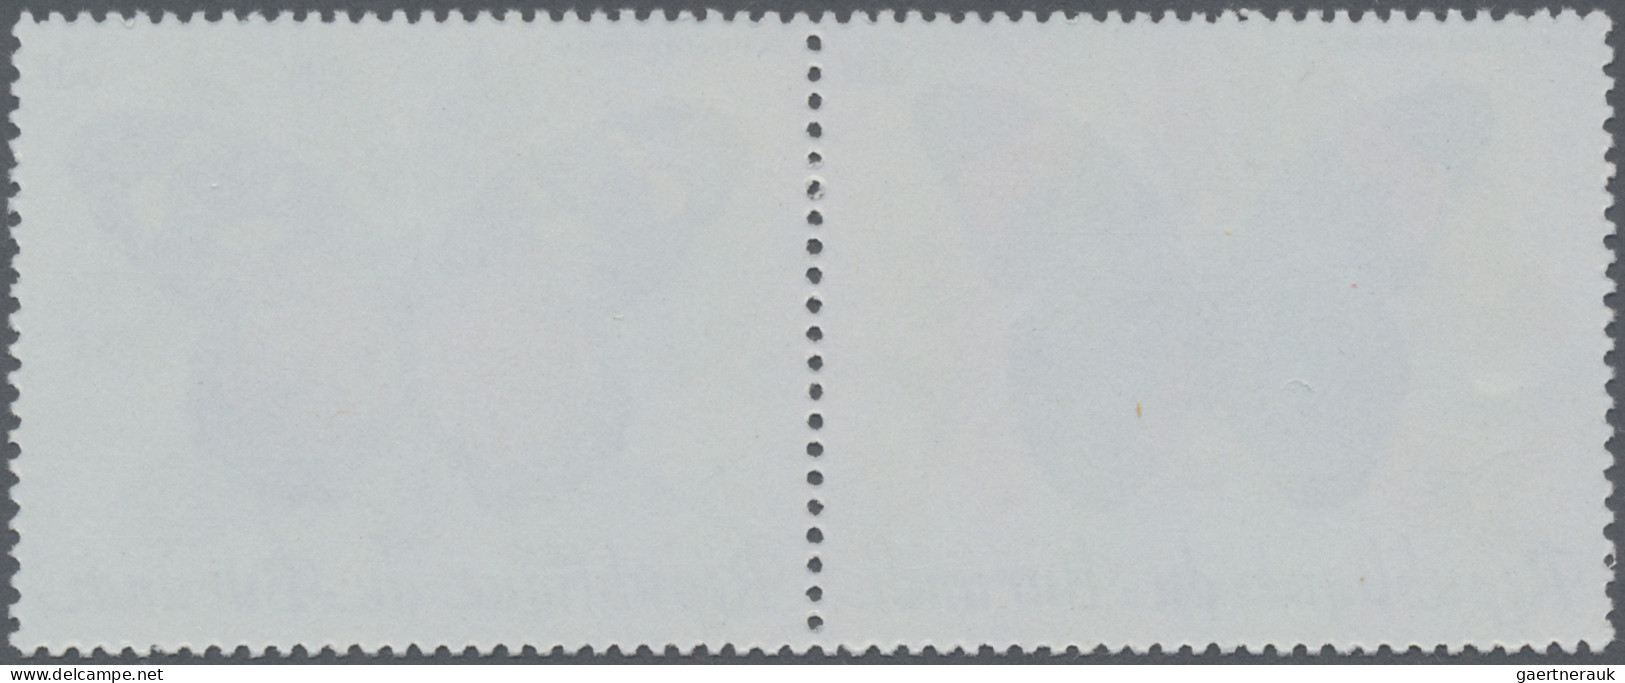 Burundi: 1984: Butterflies, Se-tenant 5 pairs of perforated (COB 385 €) and impe